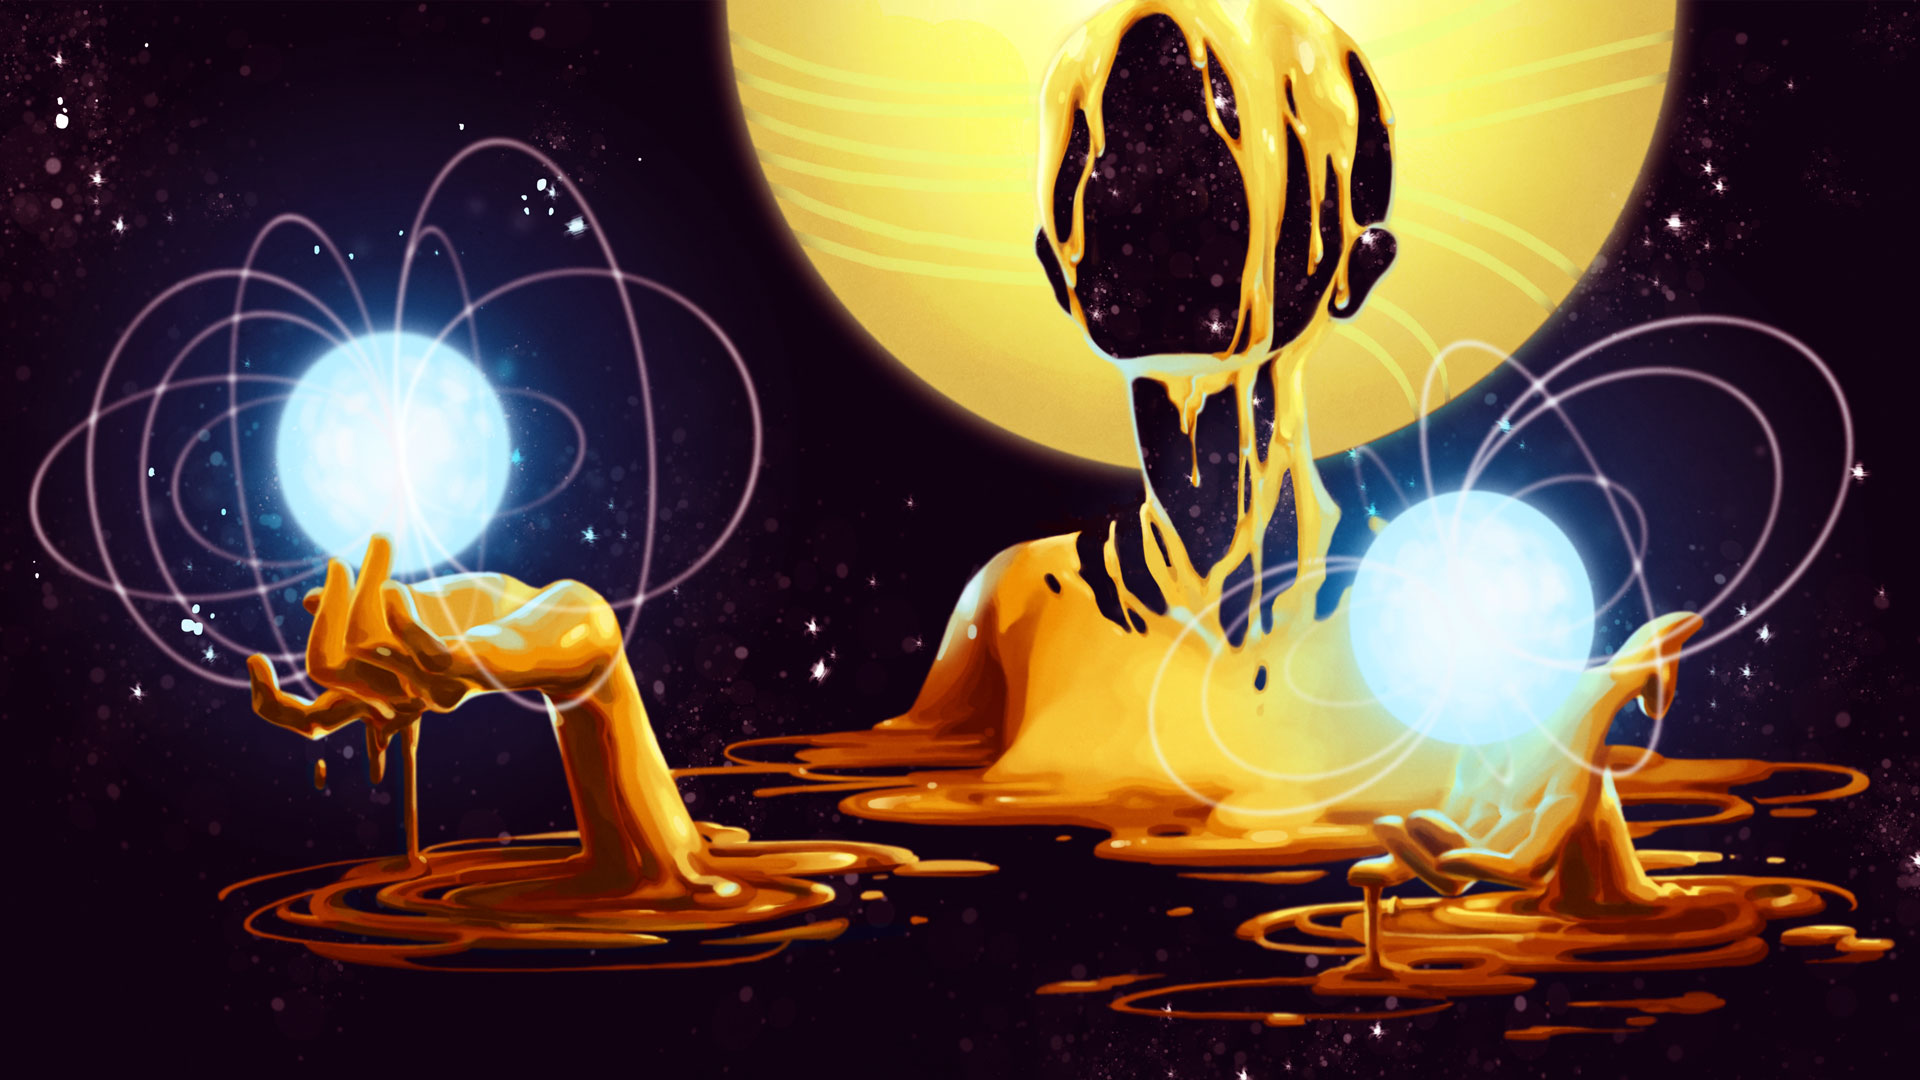 artistic illustration of a person emerging from space and holding planets, stars 